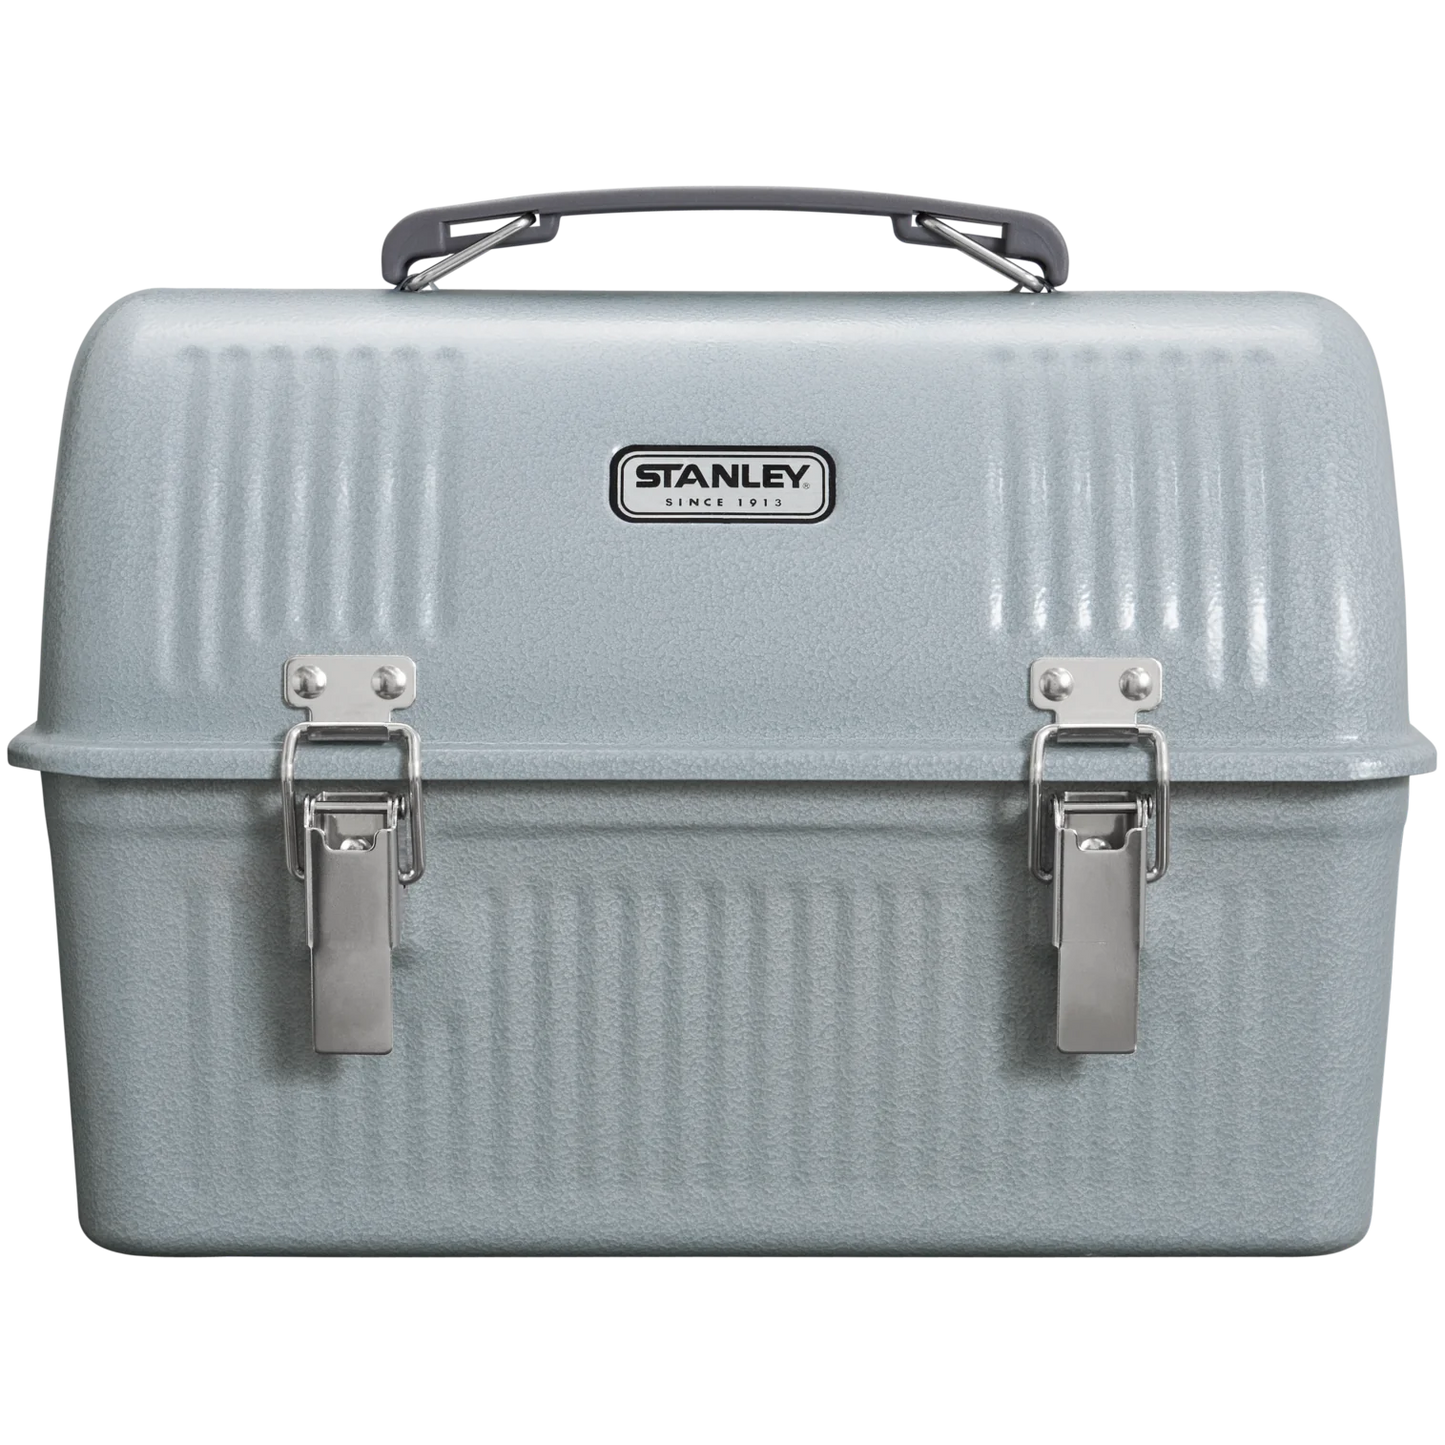 Stanley The Legendary Classic Hammer Tone Silver Lunch Box 10-01625-090